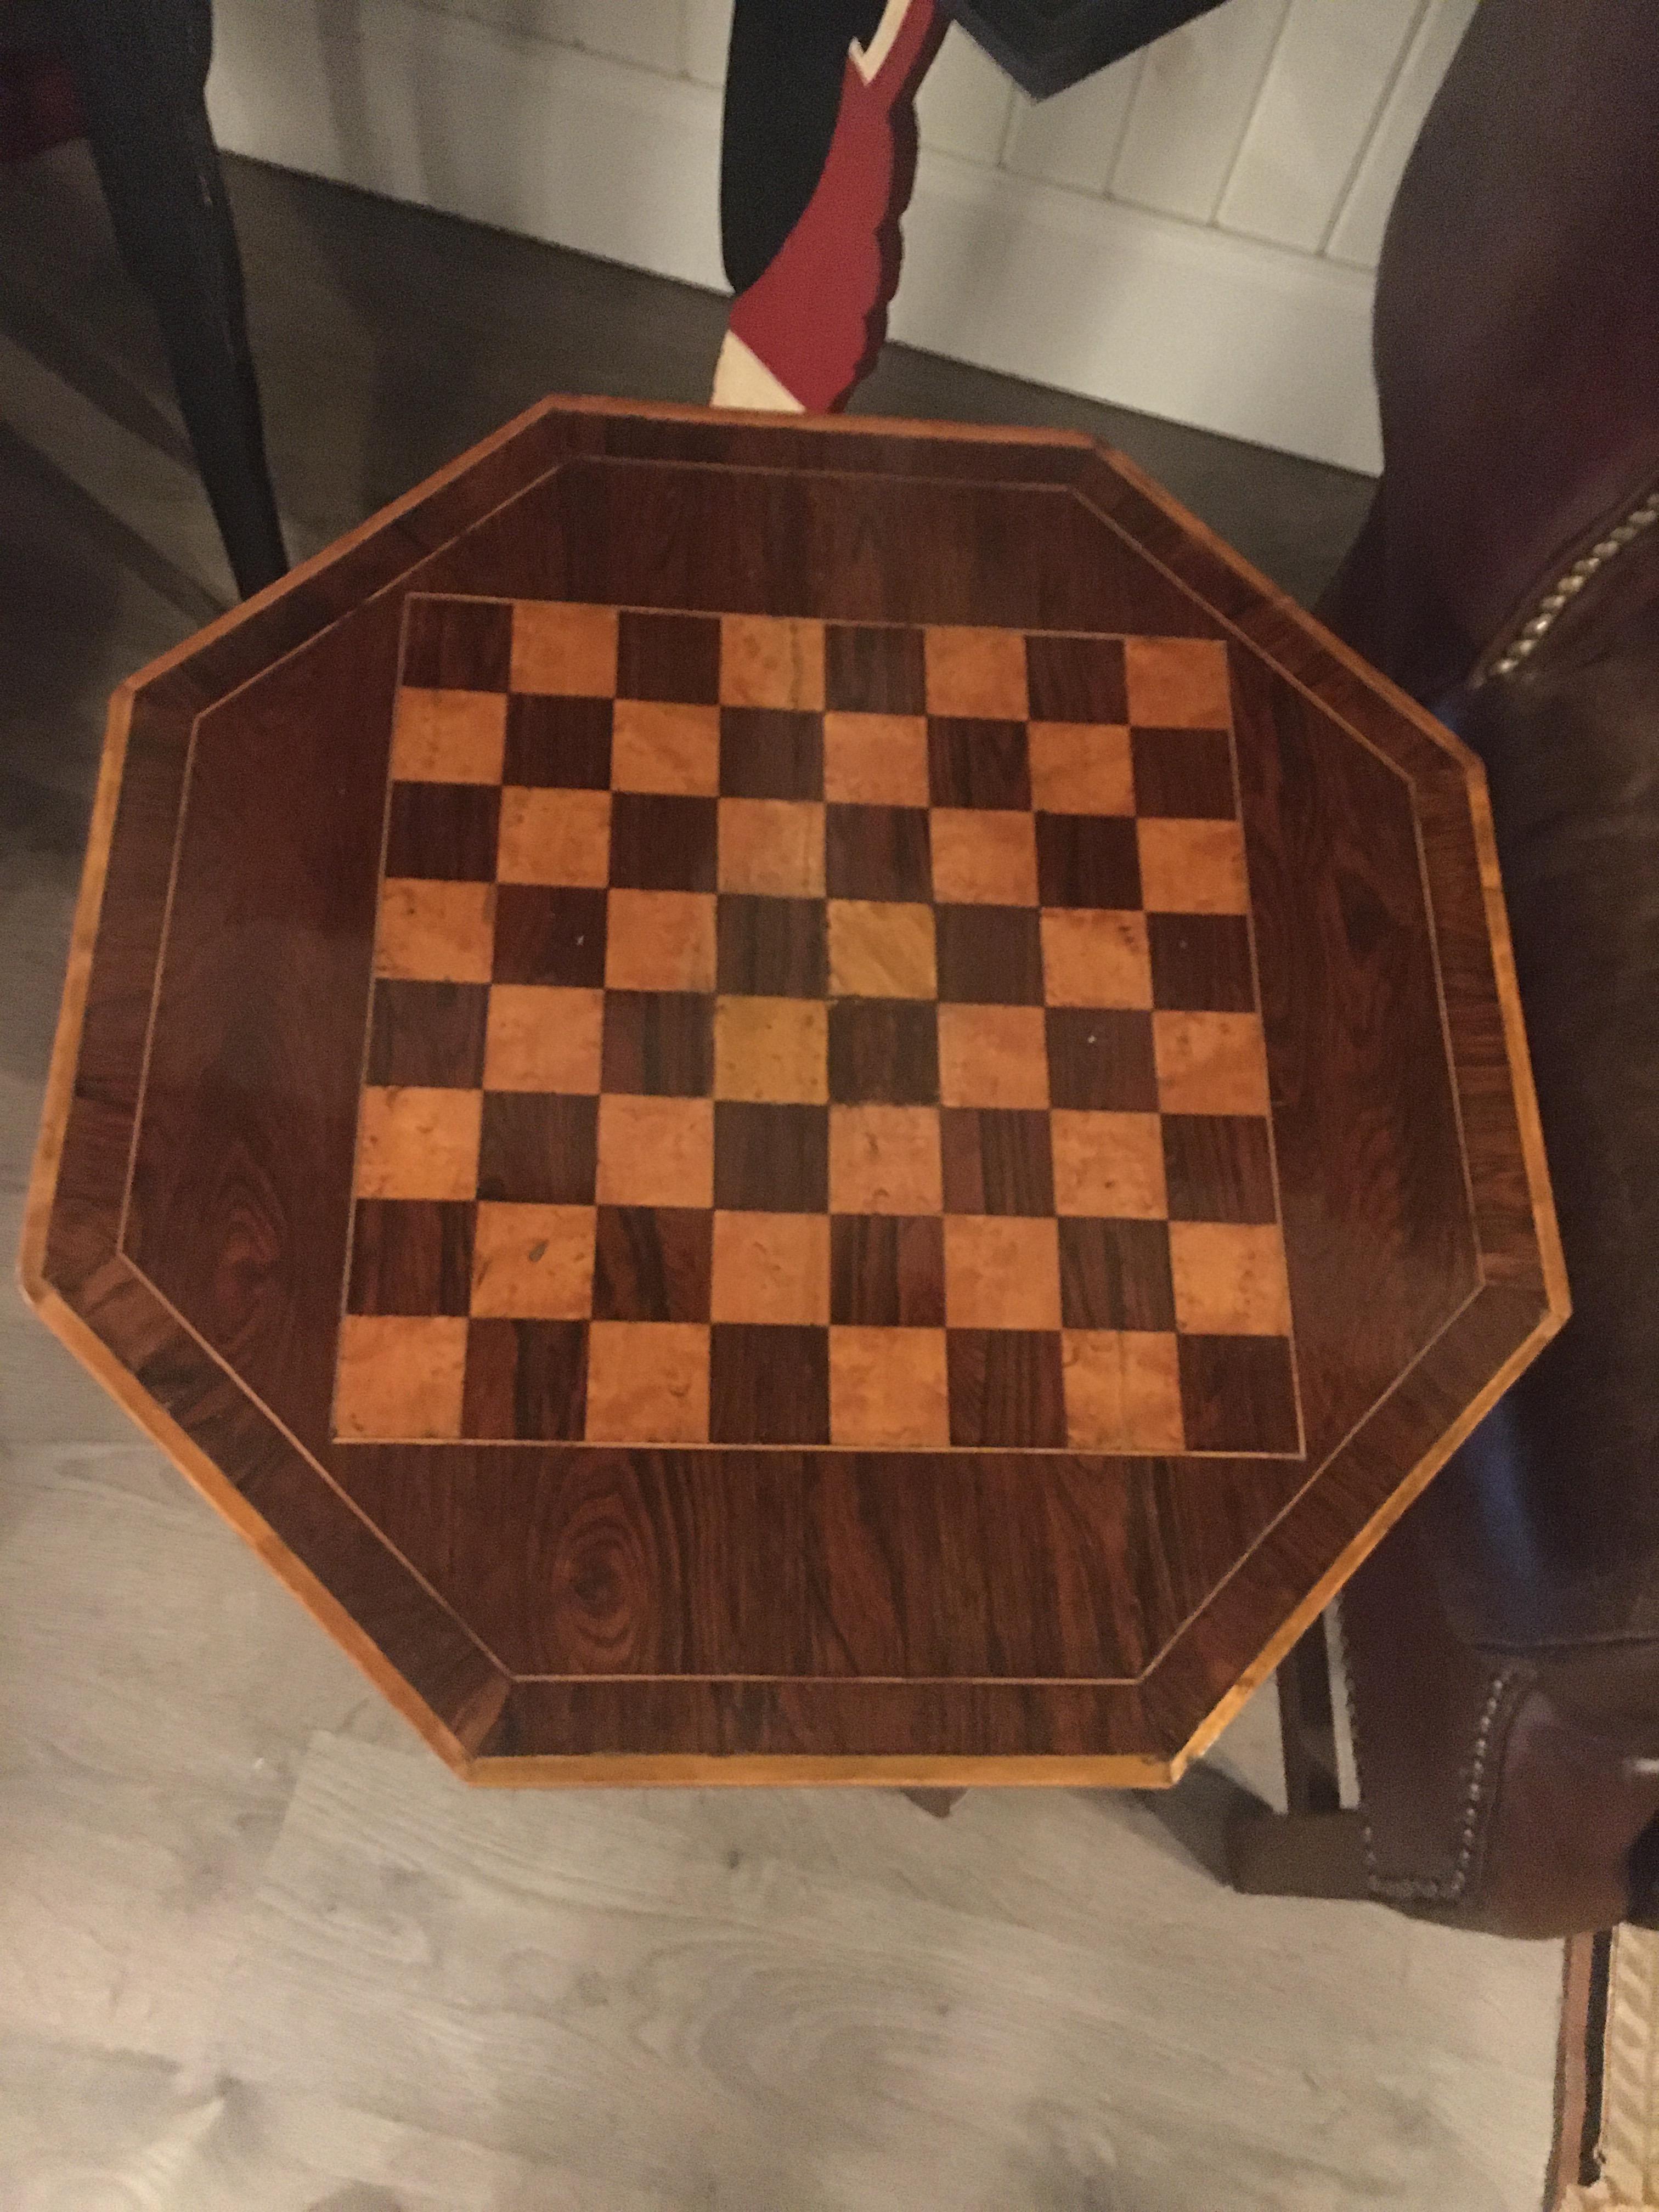 An exceptional Russian parquetry inlaid chess table with gilt mounts.  Great scale and proportions.  Nice old patina.  We have other games tables as well, feel free to call or email should you have further questions.